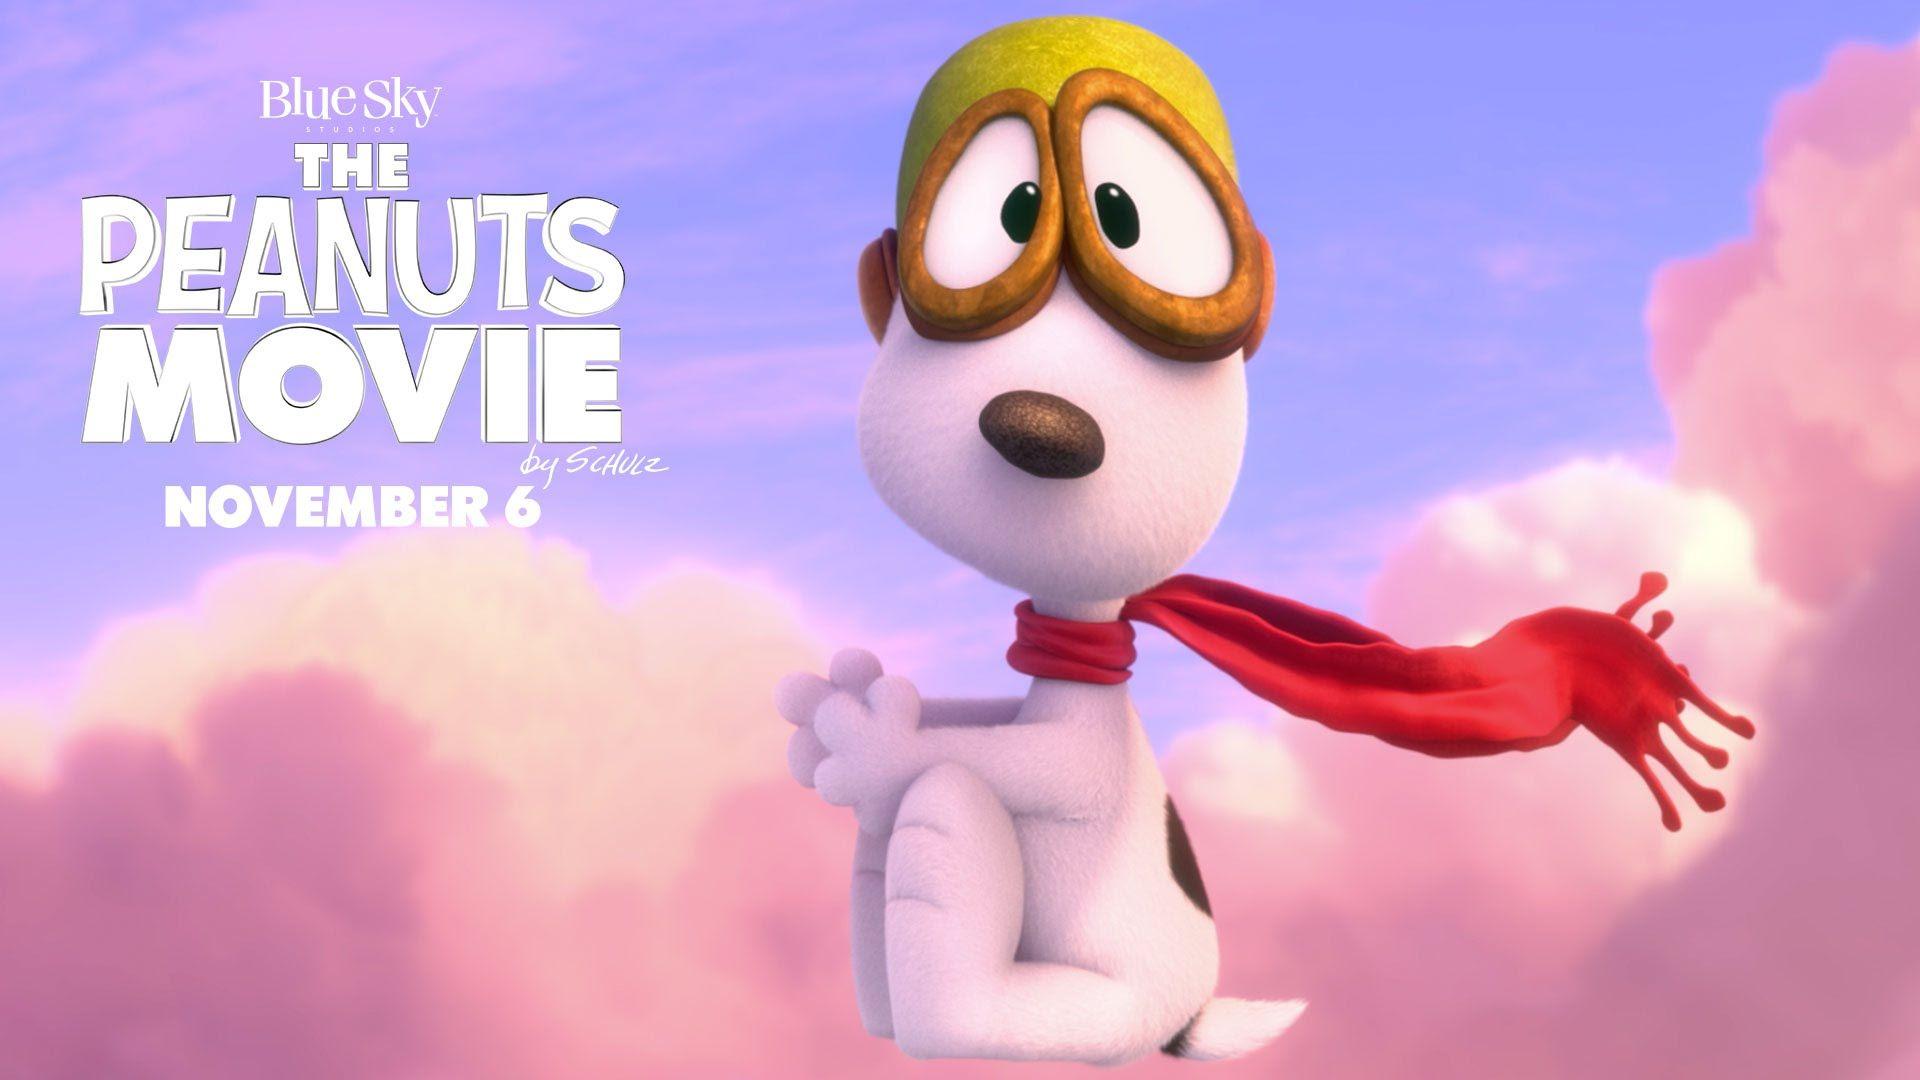 The Peanuts Movie. The Red Baron [HD]th Century FOX. Peanuts movie, Flying ace snoopy, 20th century fox